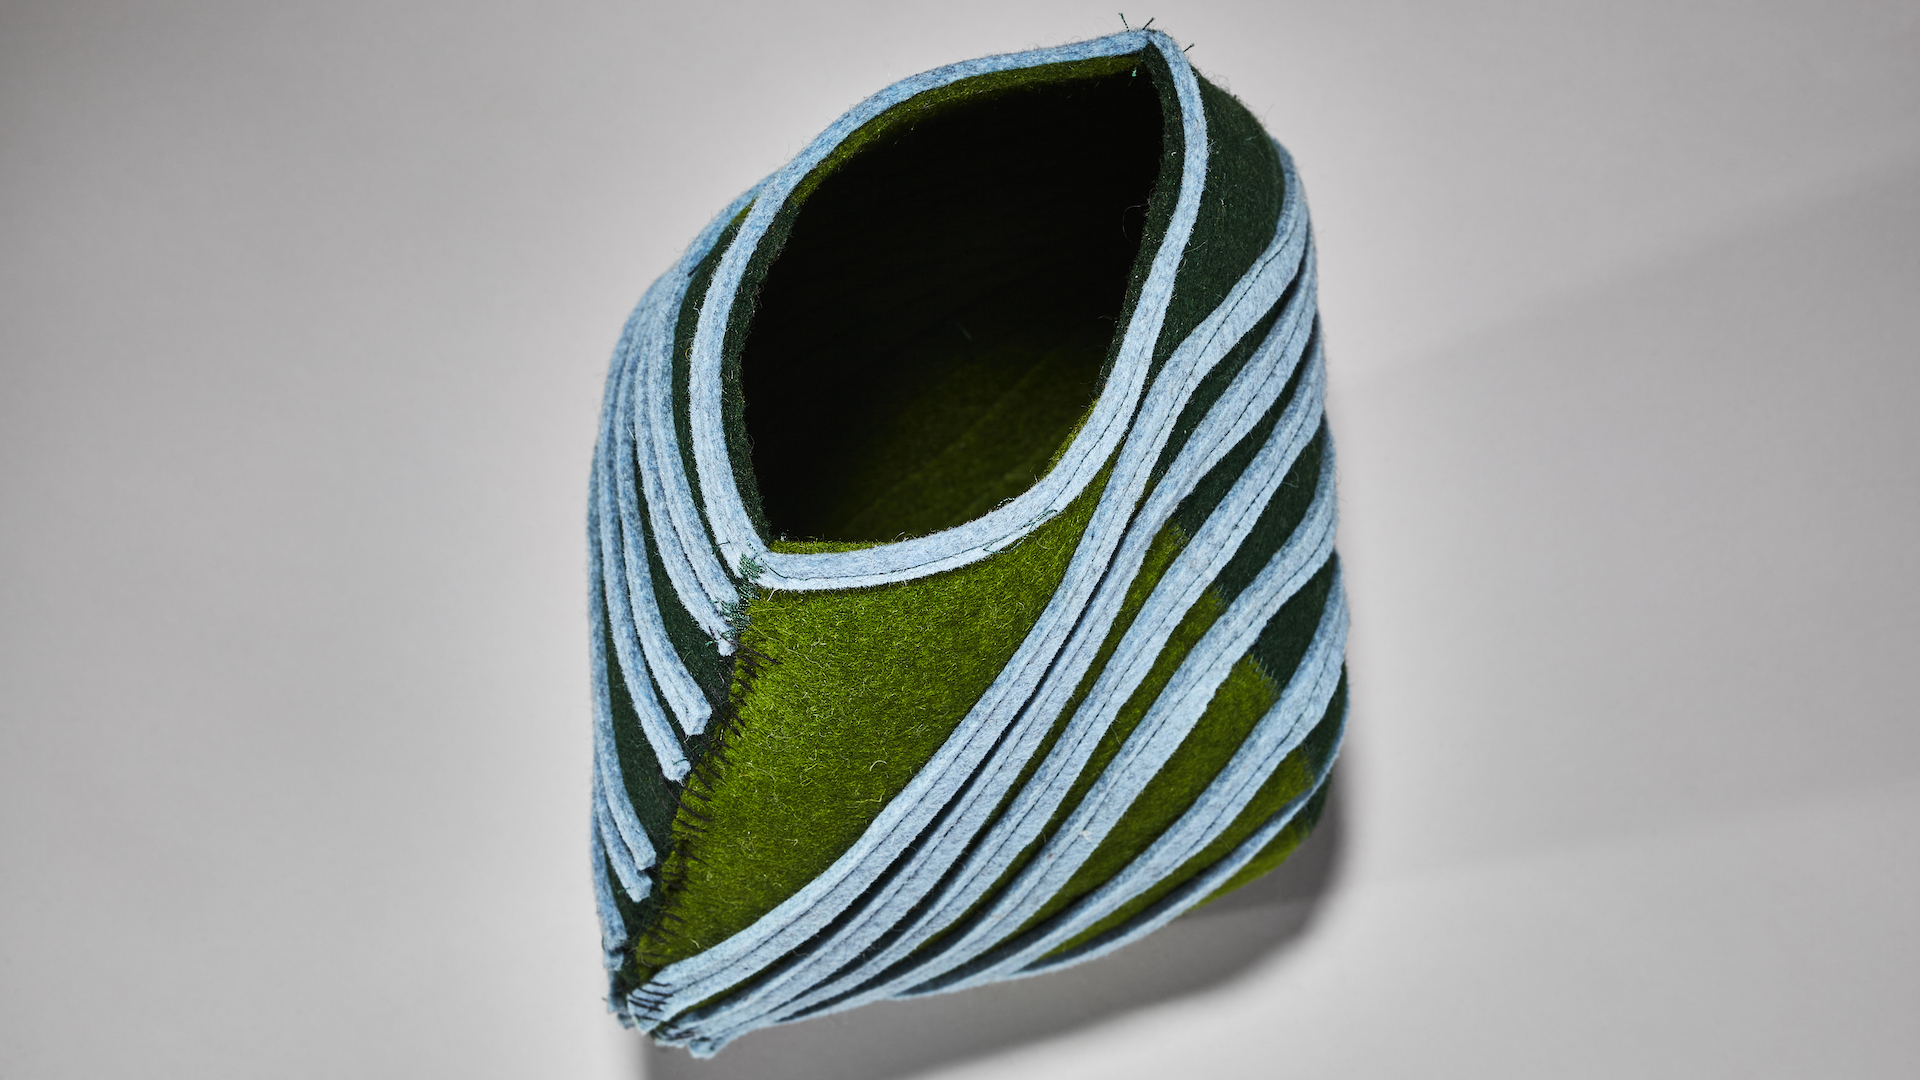 felt vessel made in pastel blue and dark green made by artist molly zimmer out of manufacturing byproducts